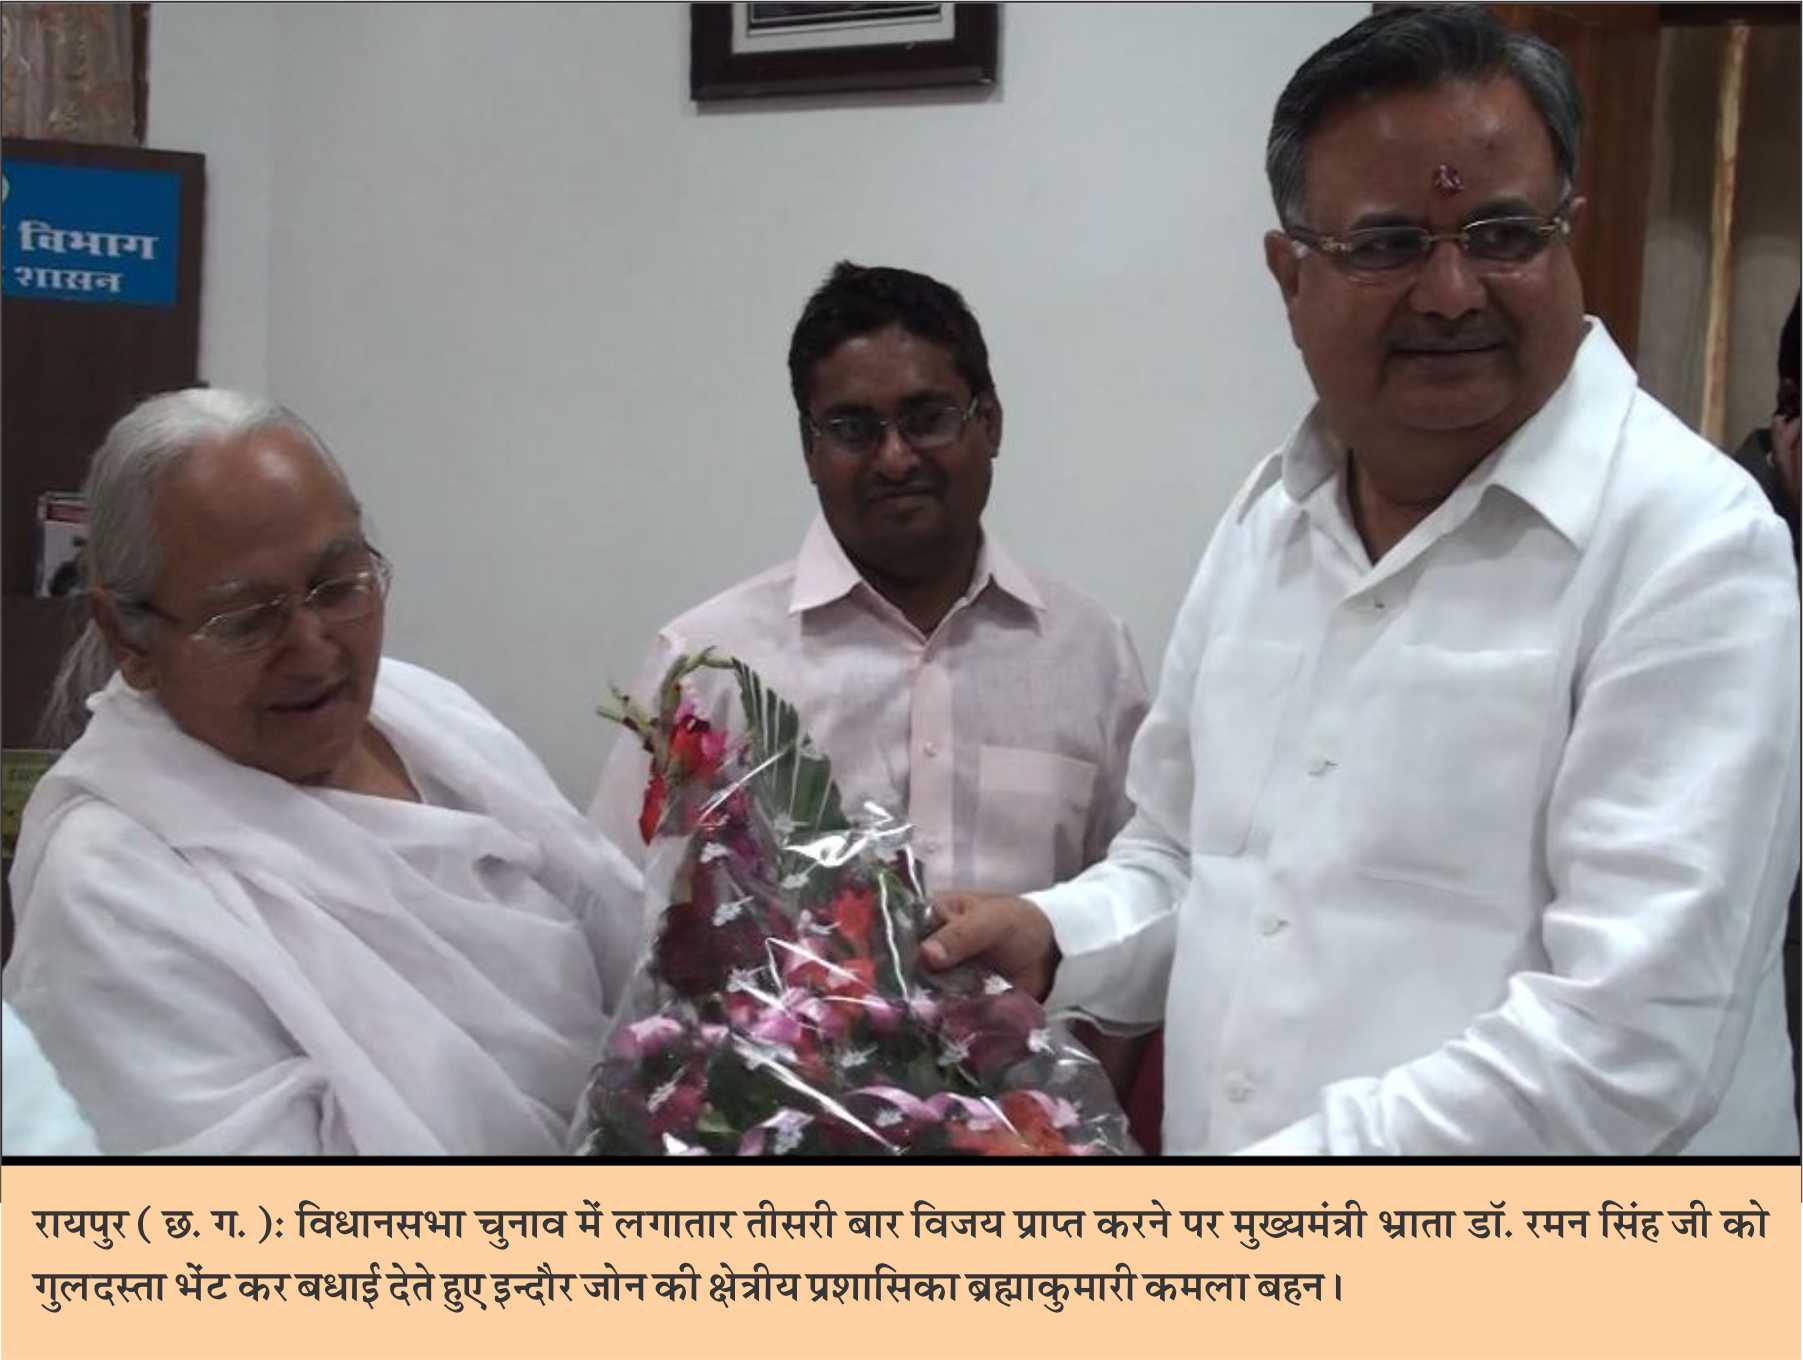 BK Sisters Greeted the Hon. Chief Minister of Chhattisgarh State - Dr. Raman Singh in Raipur